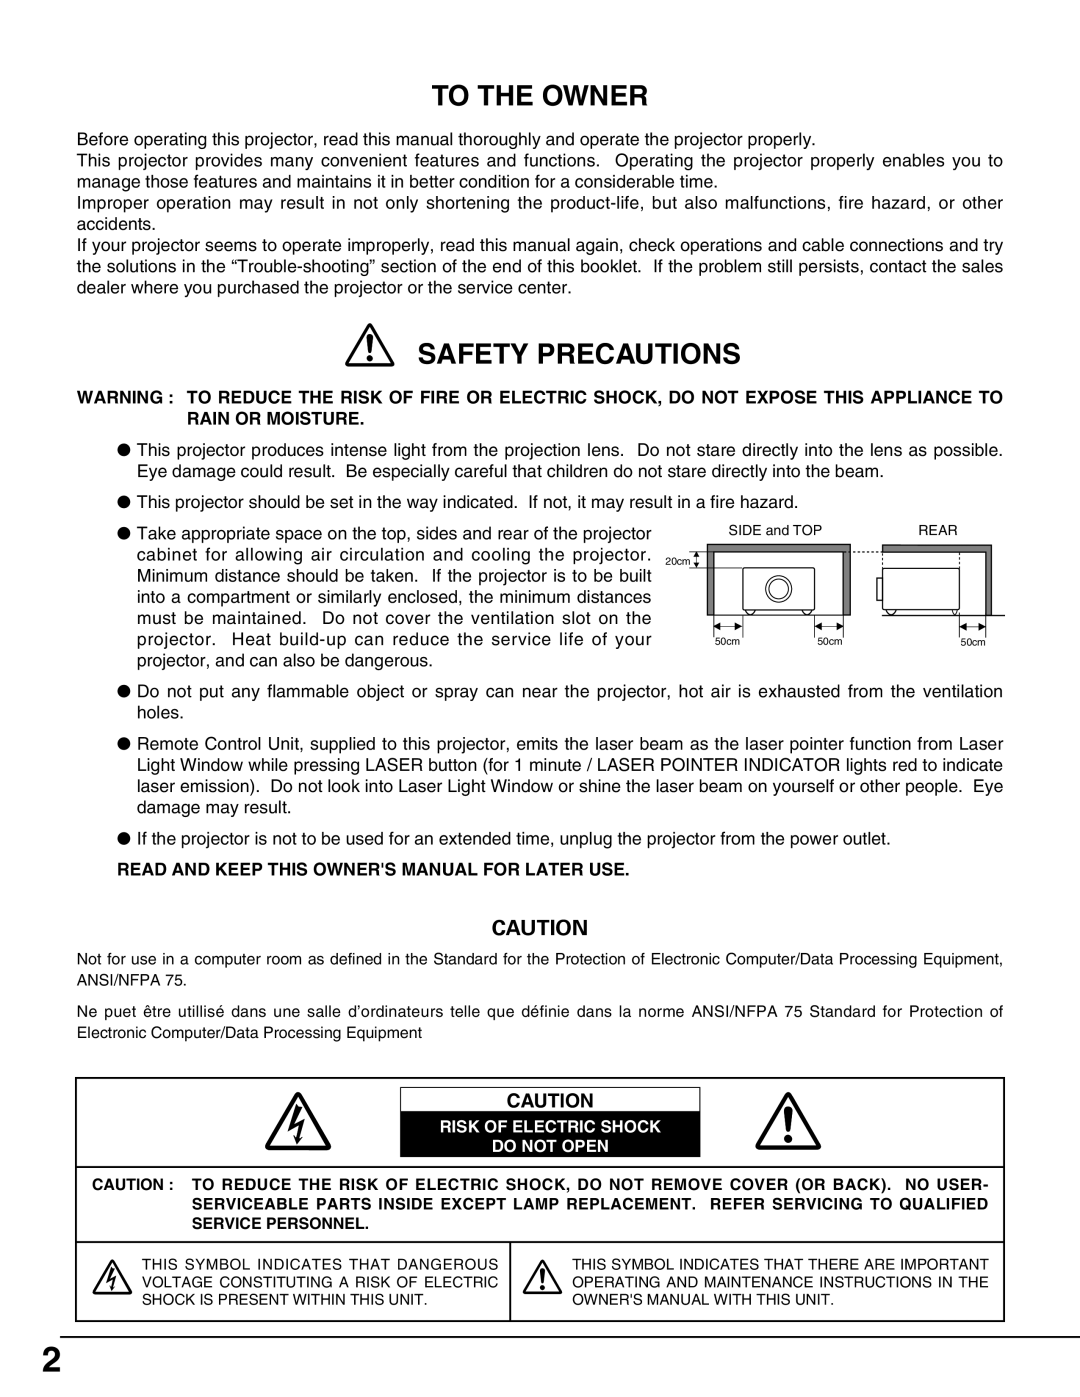 Sanyo XP51L, PLC-XP50L owner manual To The Owner, Safety Precautions, Read And Keep This Owners Manual For Later Use 